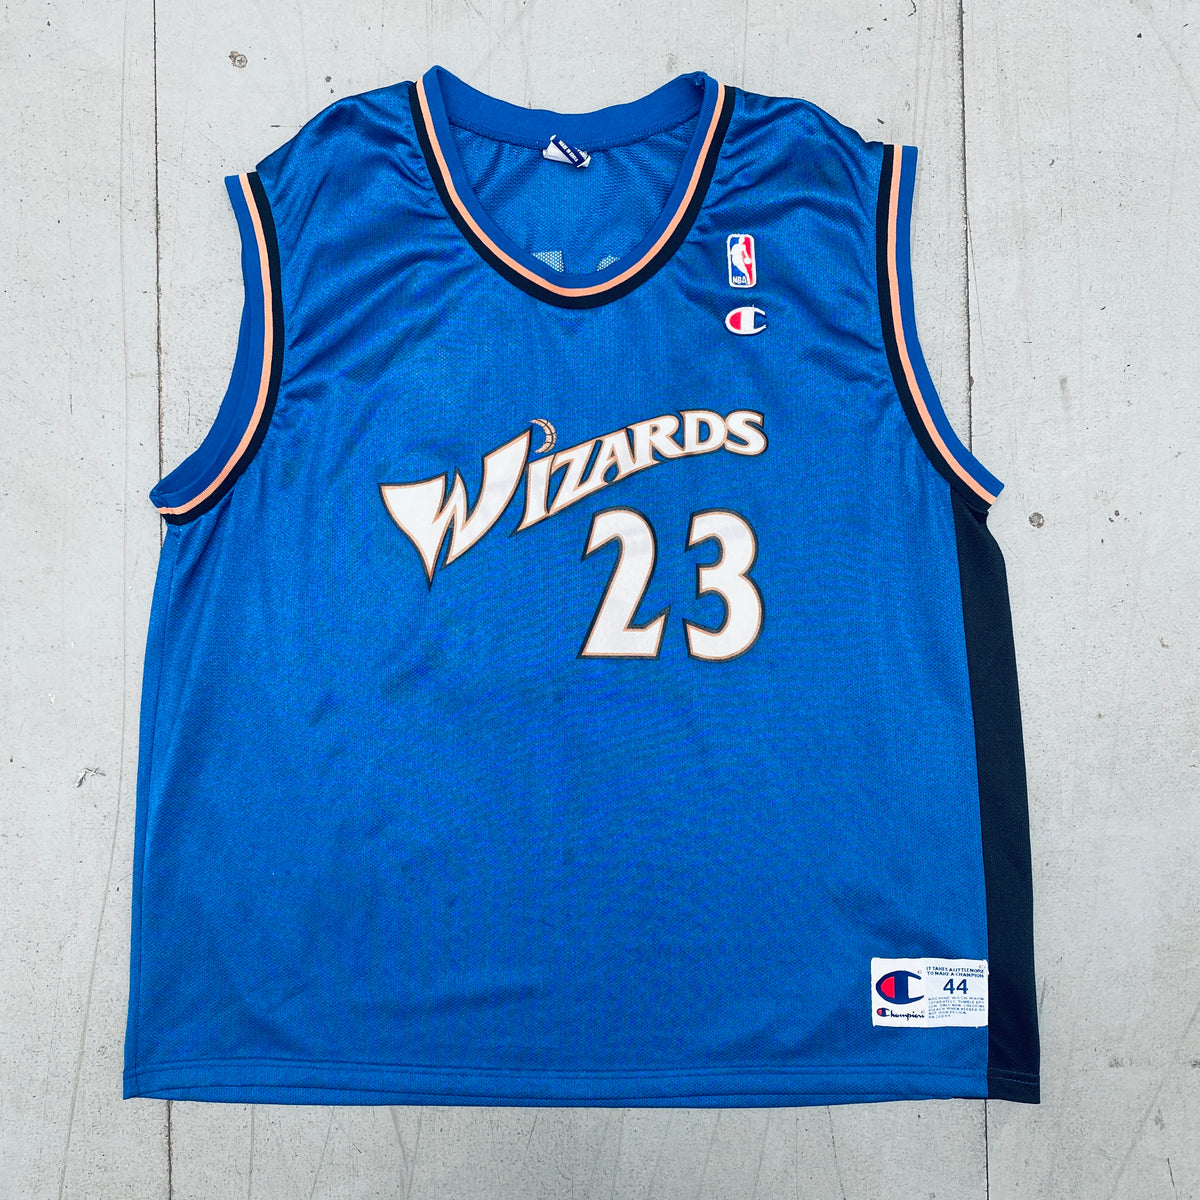 Wizards 23 Jersey 